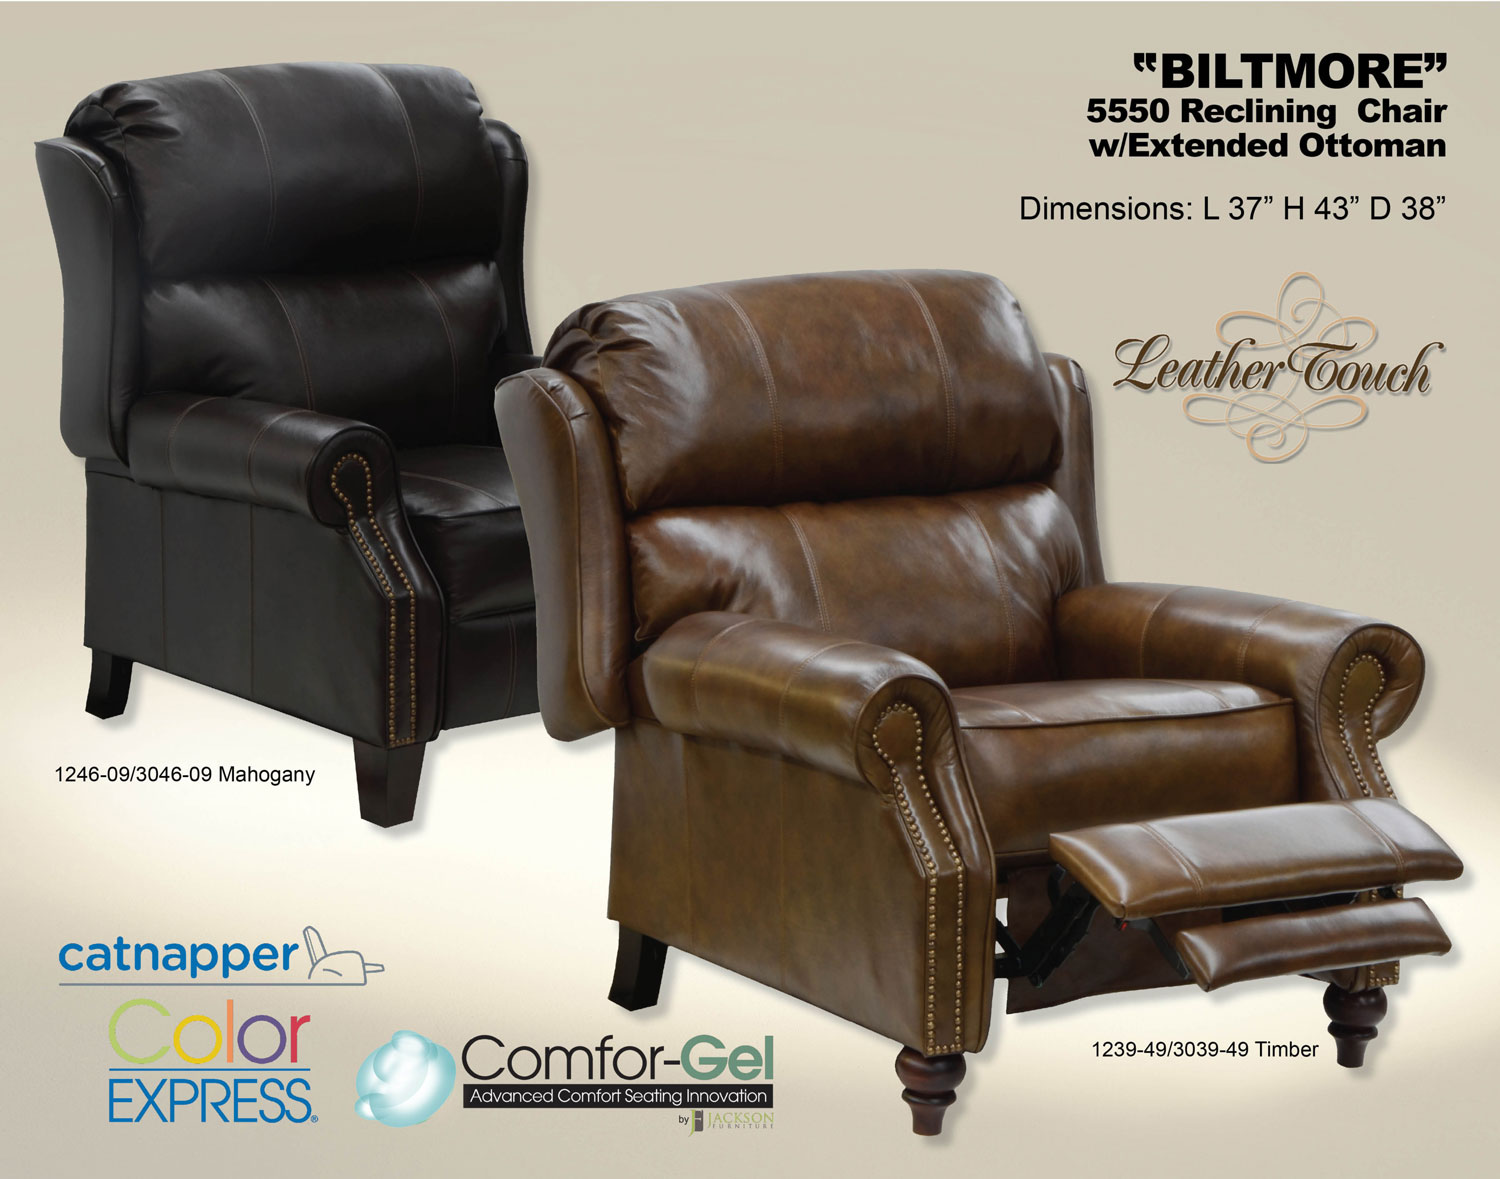 CatNapper Biltmore Top Grain Leather Touch Reclining Chair with Extended Ottoman - Timber